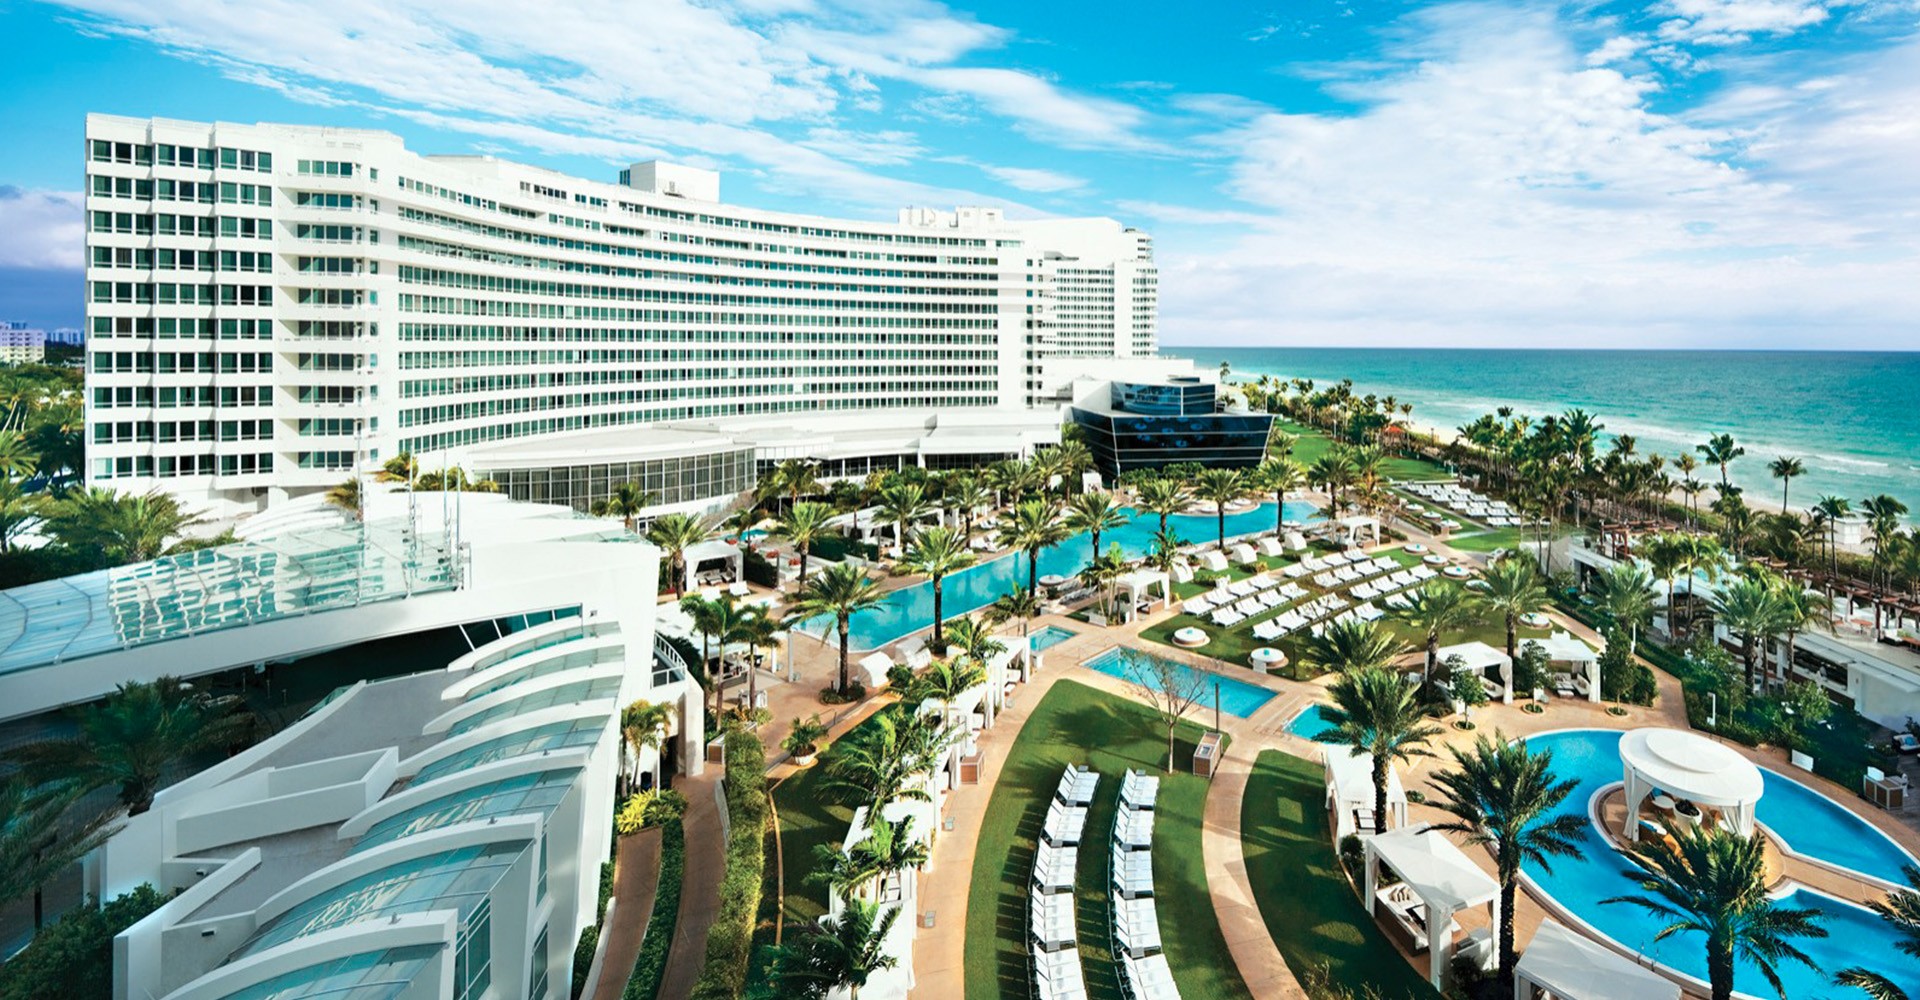 Easygrass artificial grass and turf in miami hotel foutainebleau